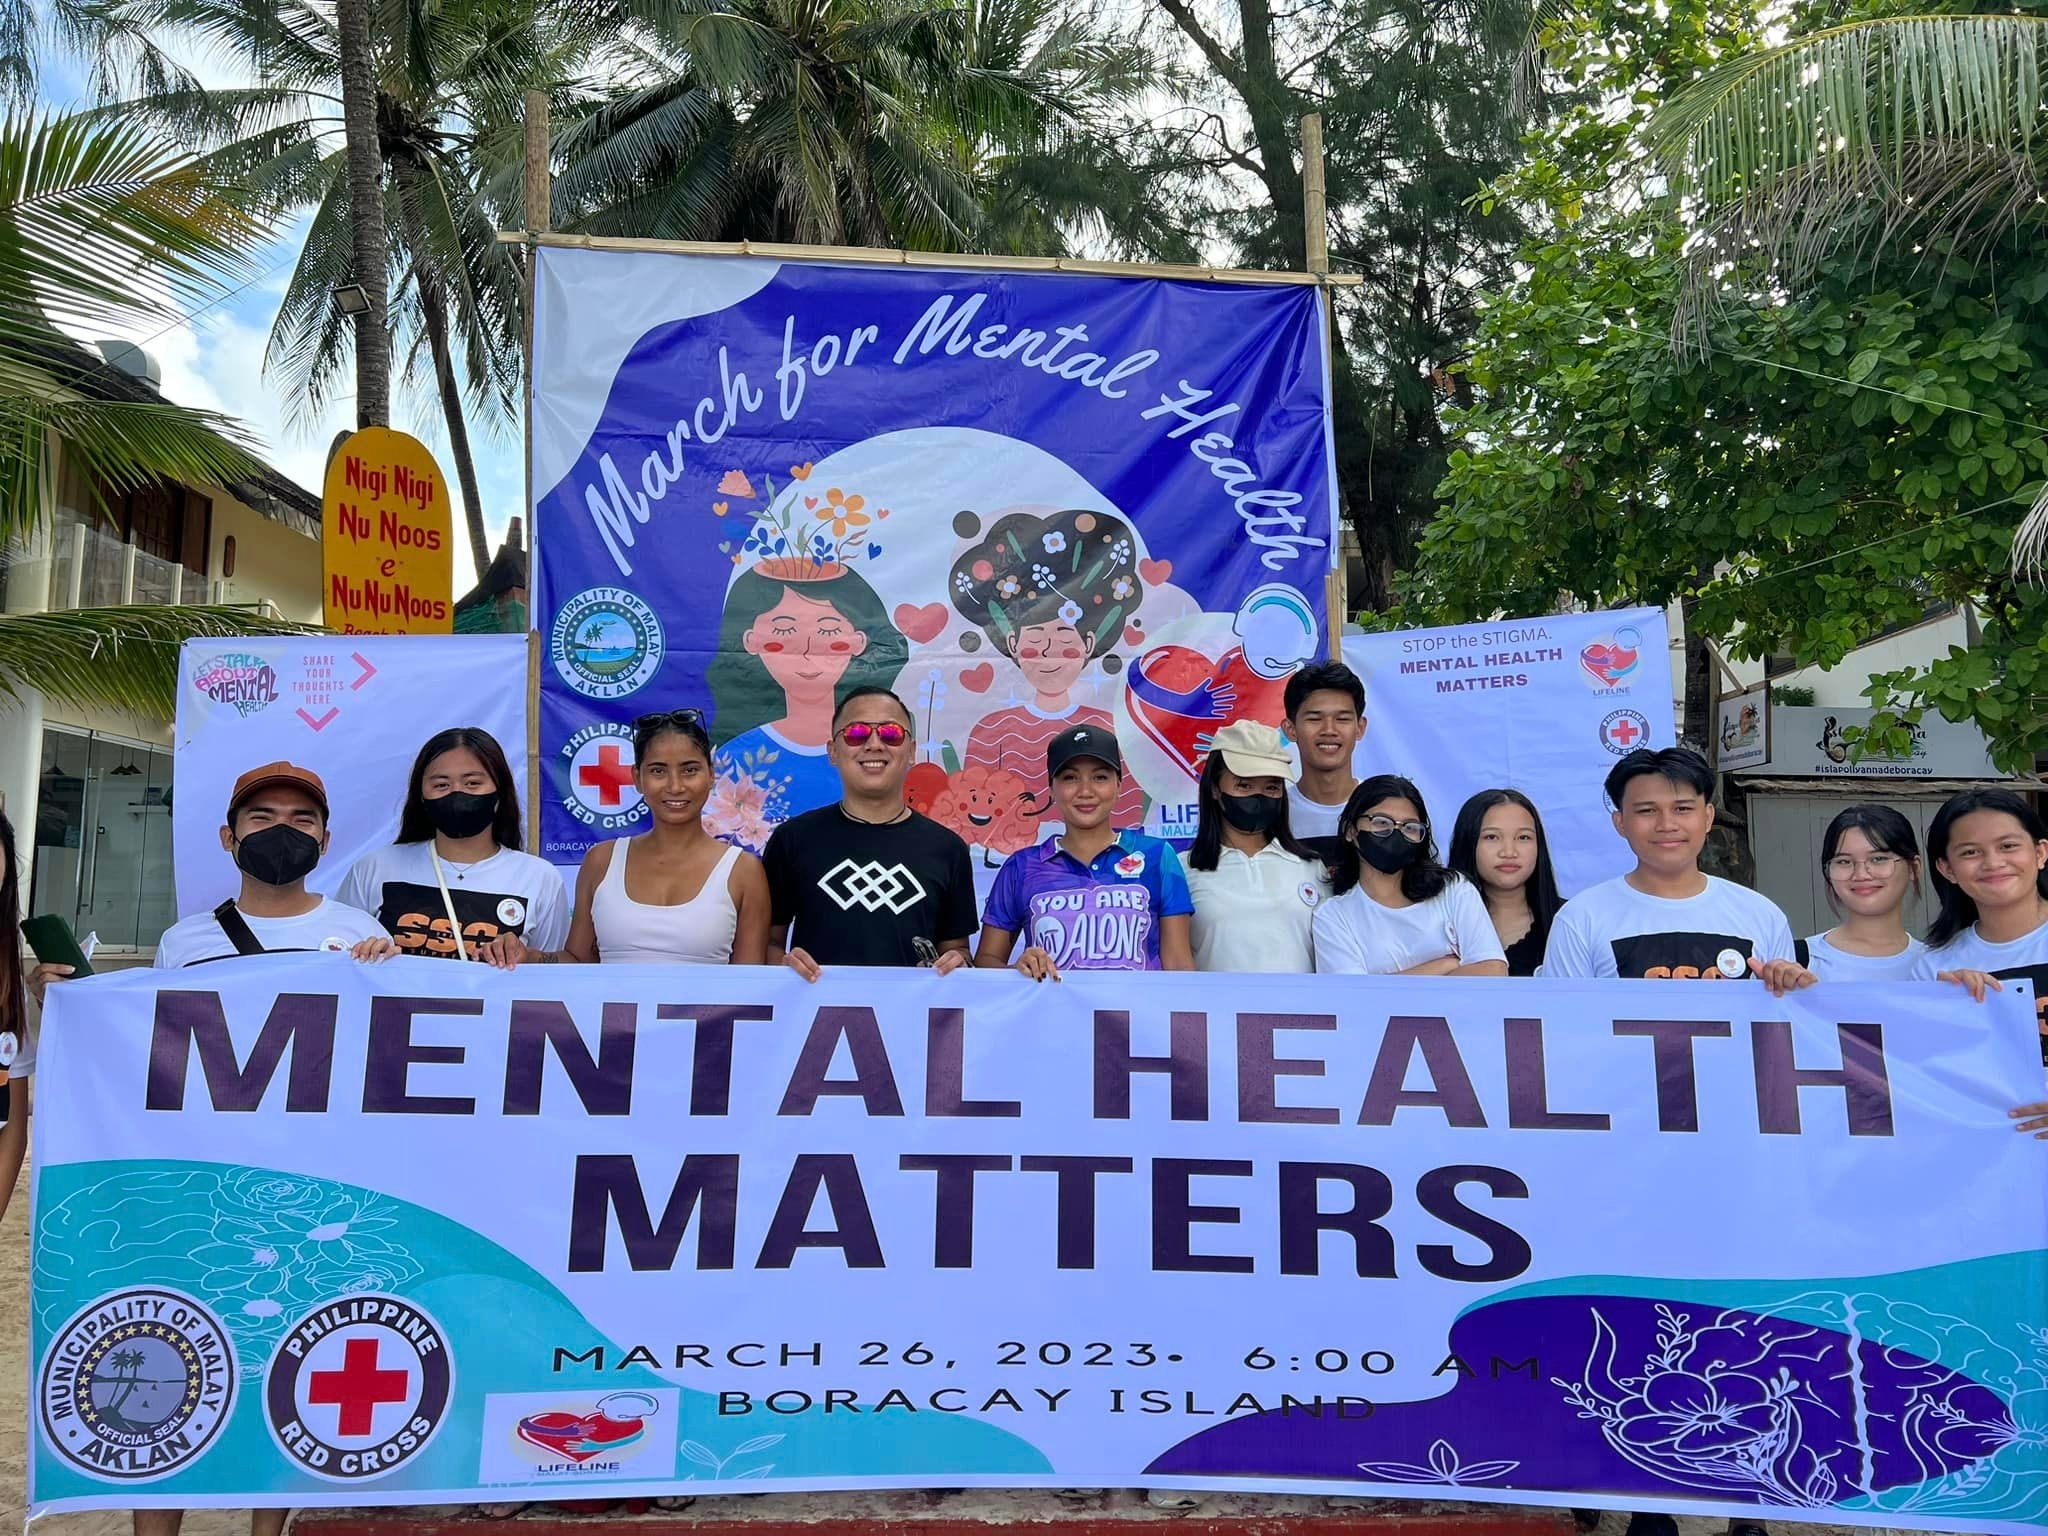 Boracay islanders come together to help deal with mental health woes